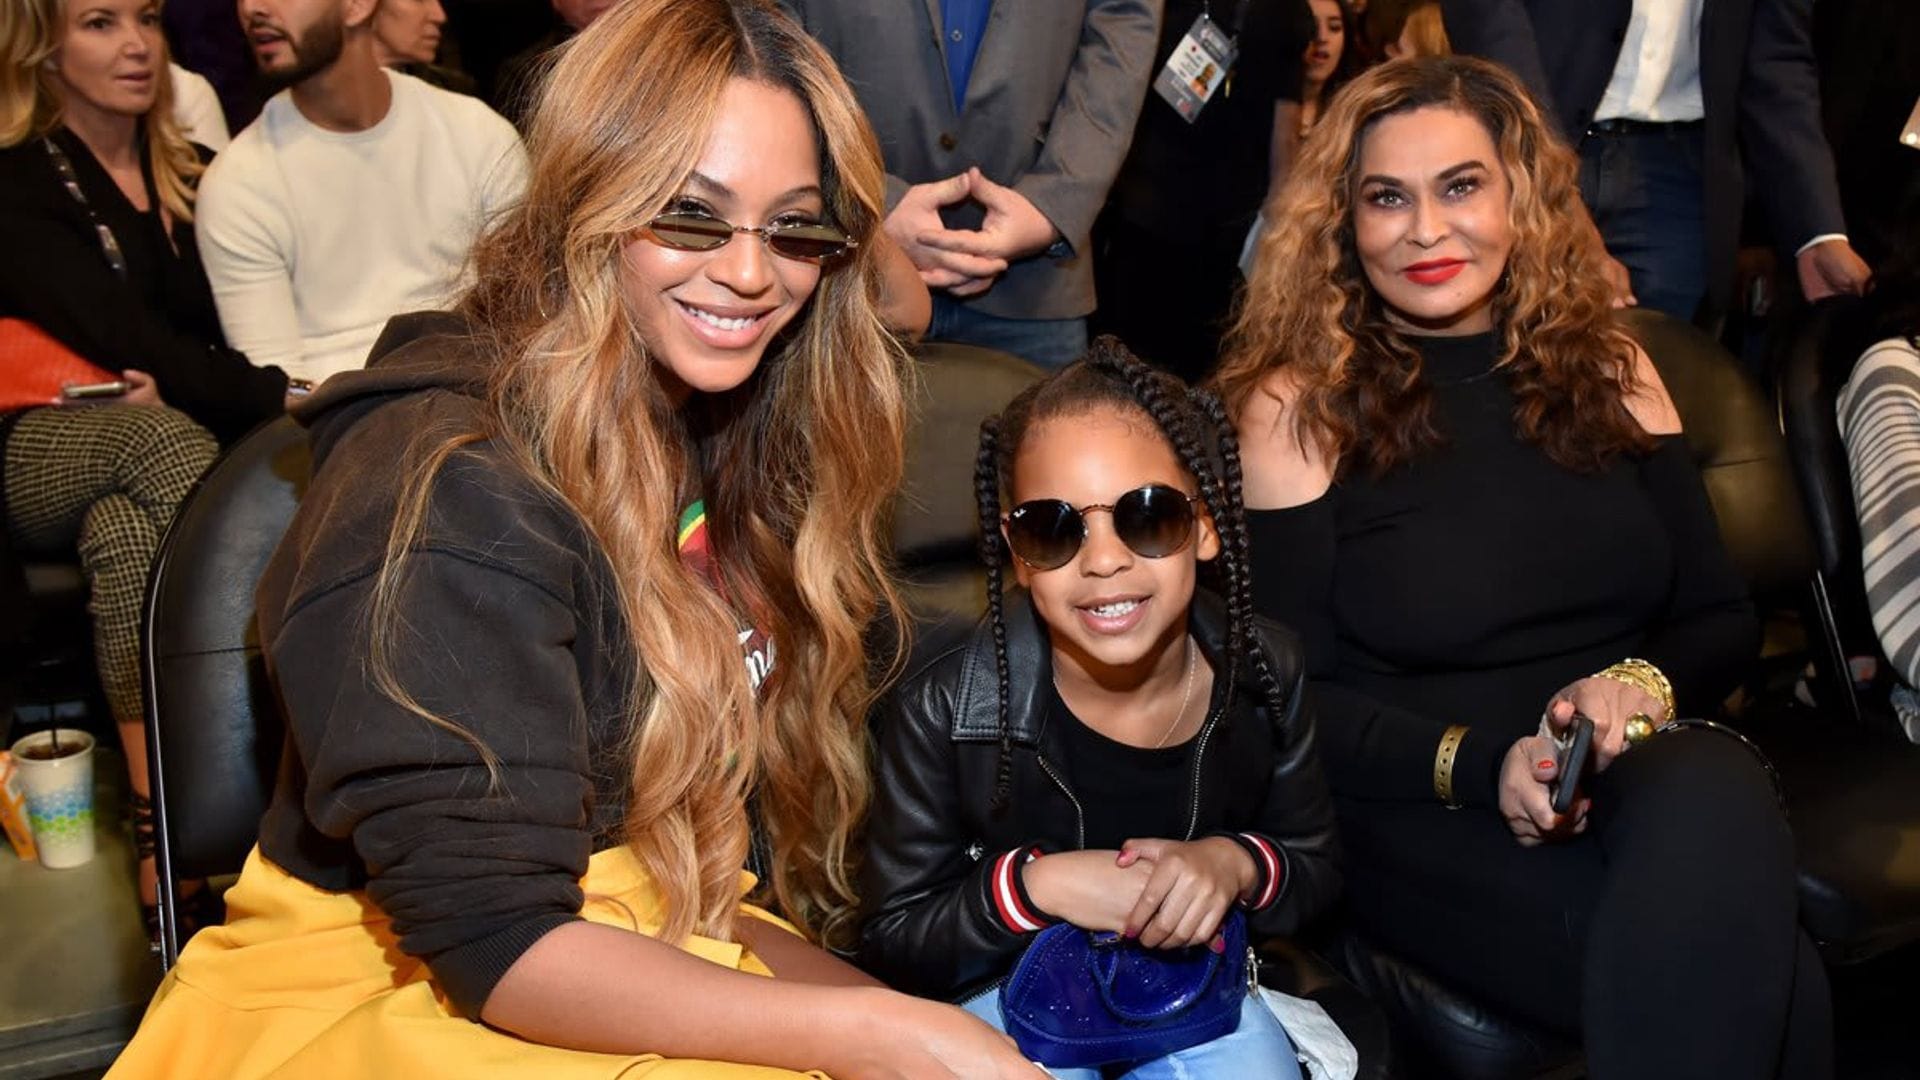 Blue Ivy Carter becomes youngest MTV VMAs winner in history for “Brown Skin Girl”